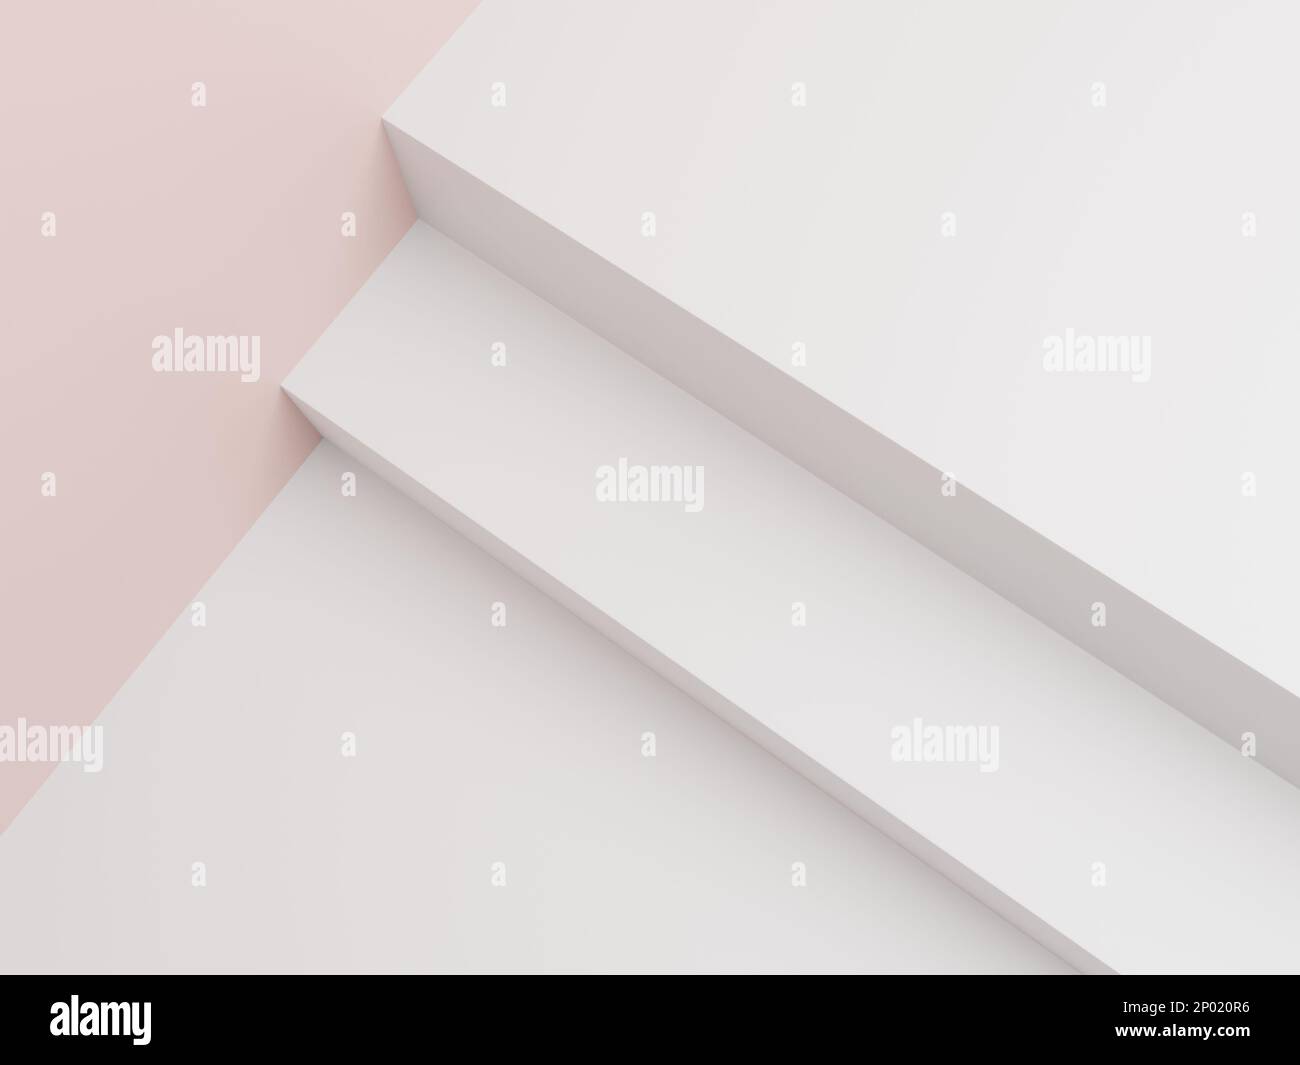 3D Rendering Pastel Color Studio Shot Product Display Background with Geometric Blocks or Staircase for Beauty, Cosmetics or Skin Care Product Display Stock Photo